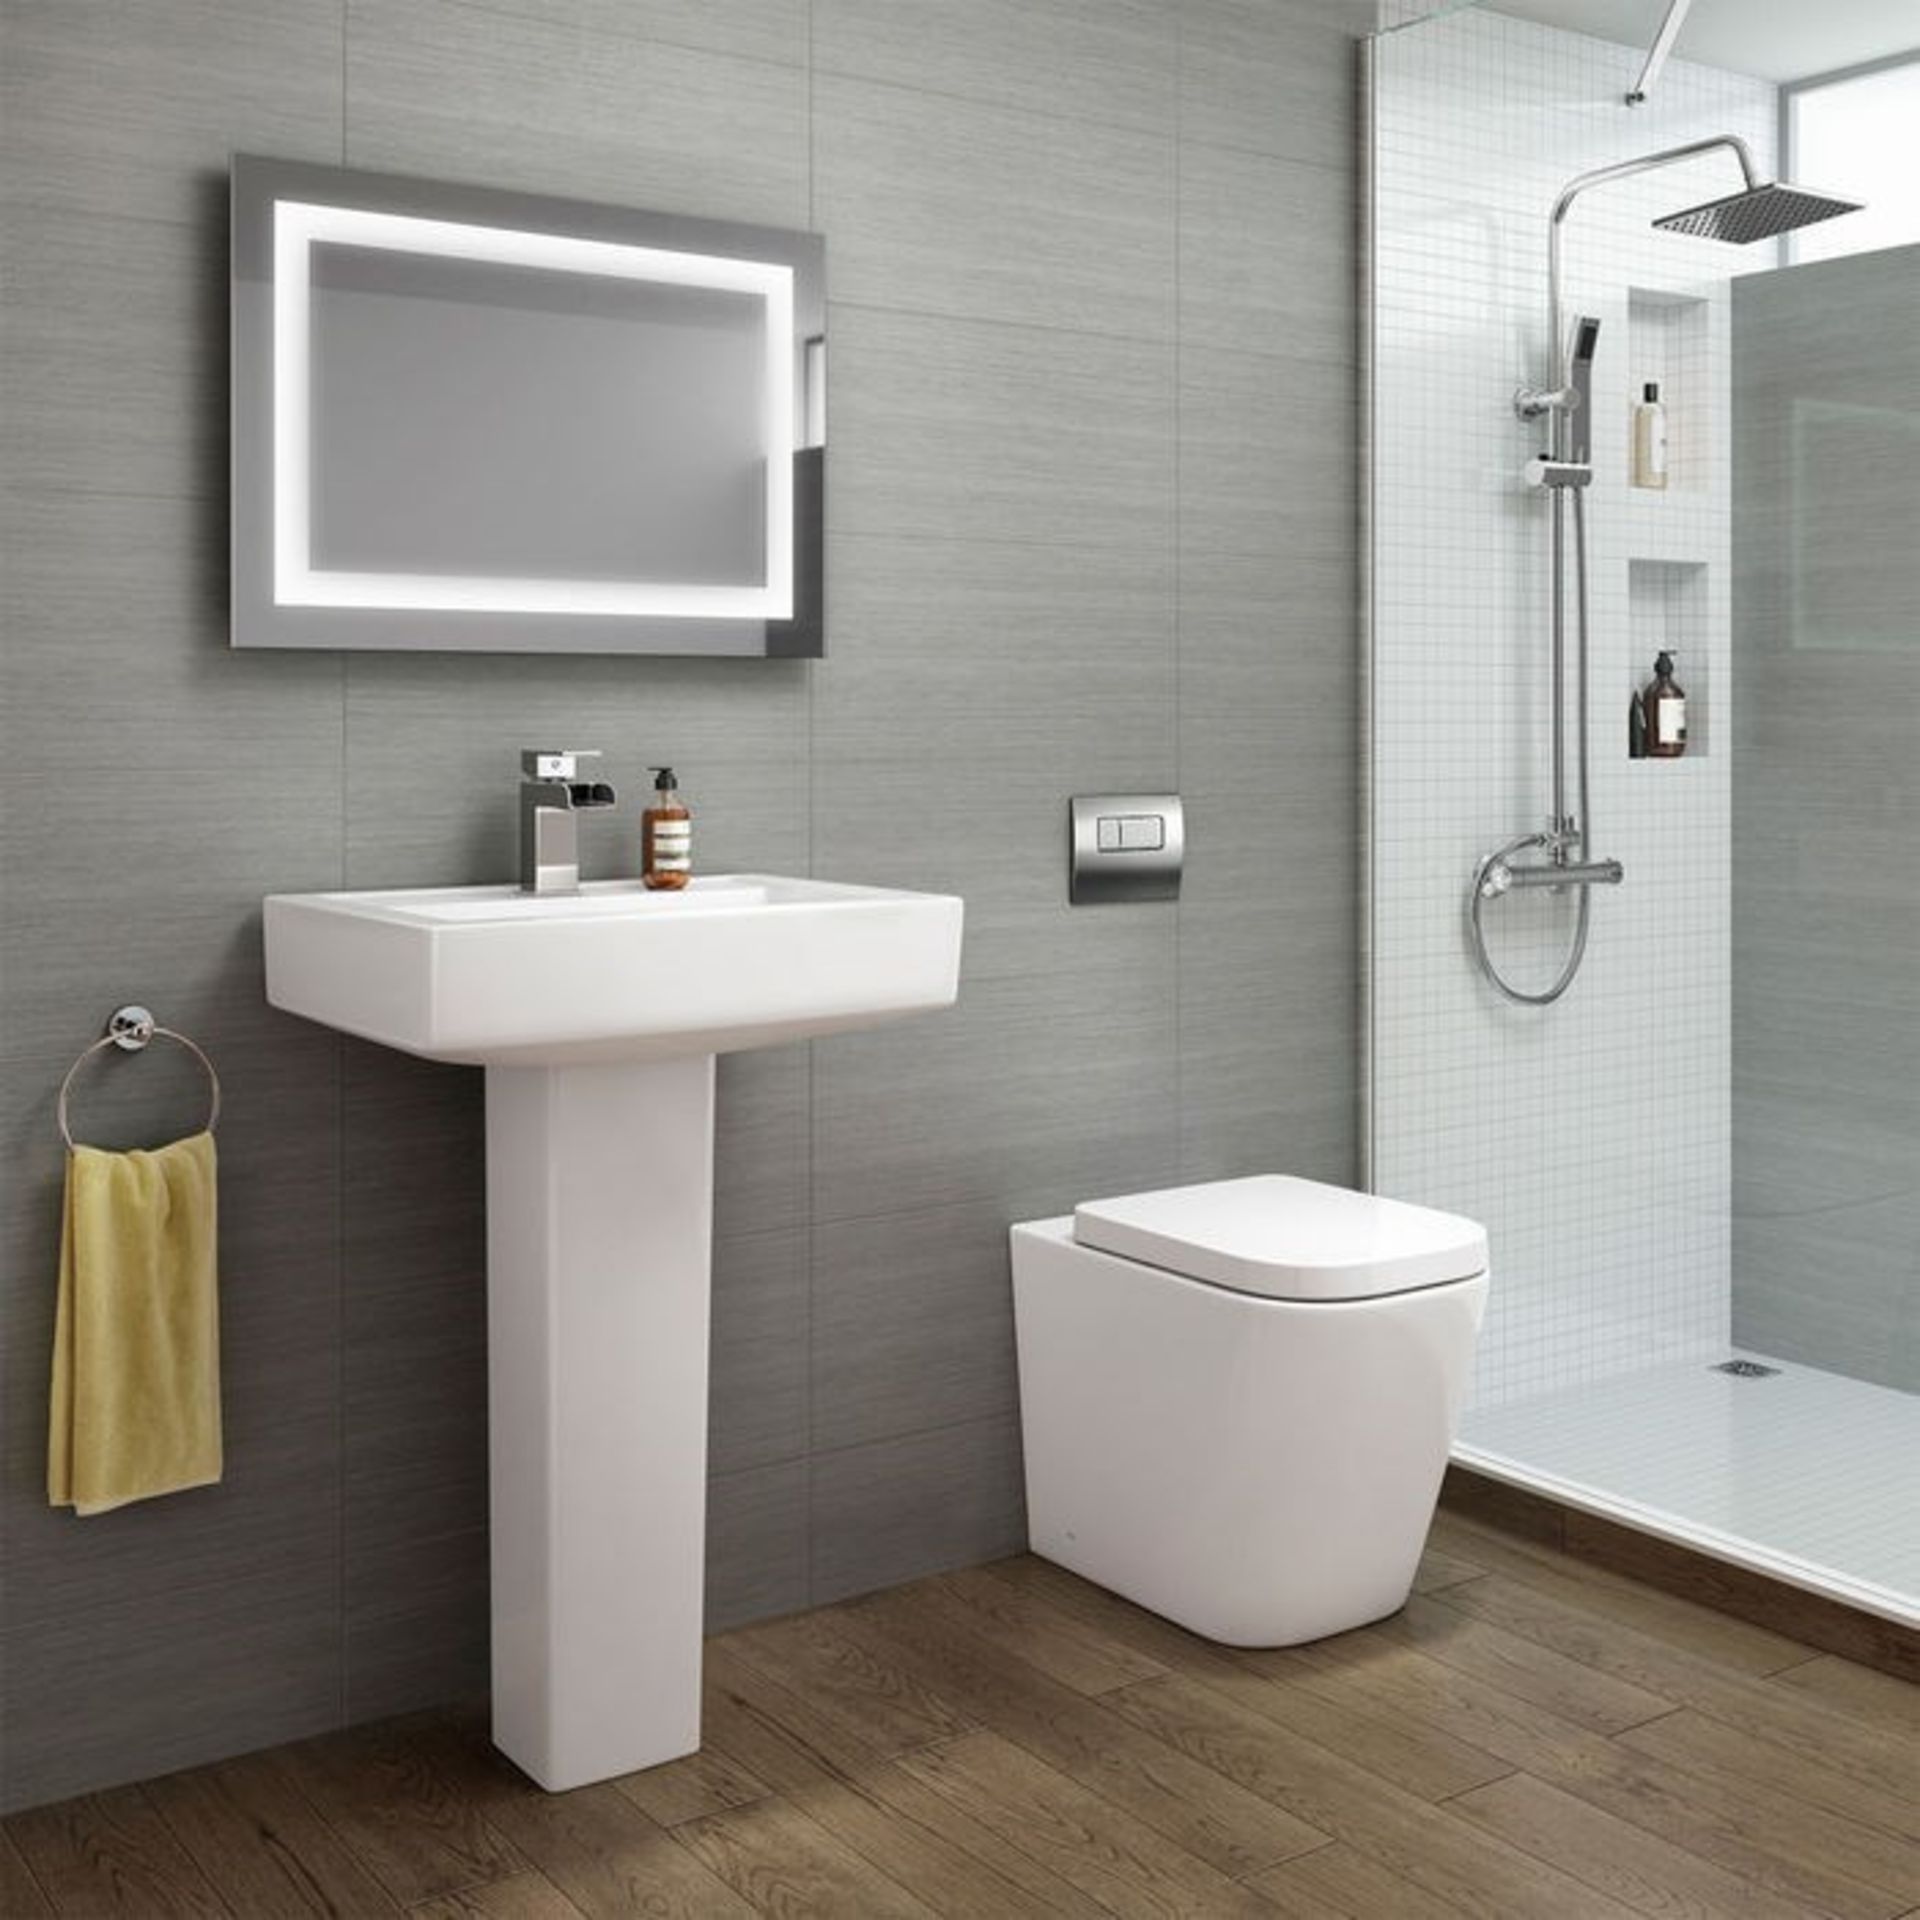 Florence Rimless Back to Wall Toilet inc Luxury Soft Close Seat. RRP £349.99 each.Rimless des... - Image 2 of 2